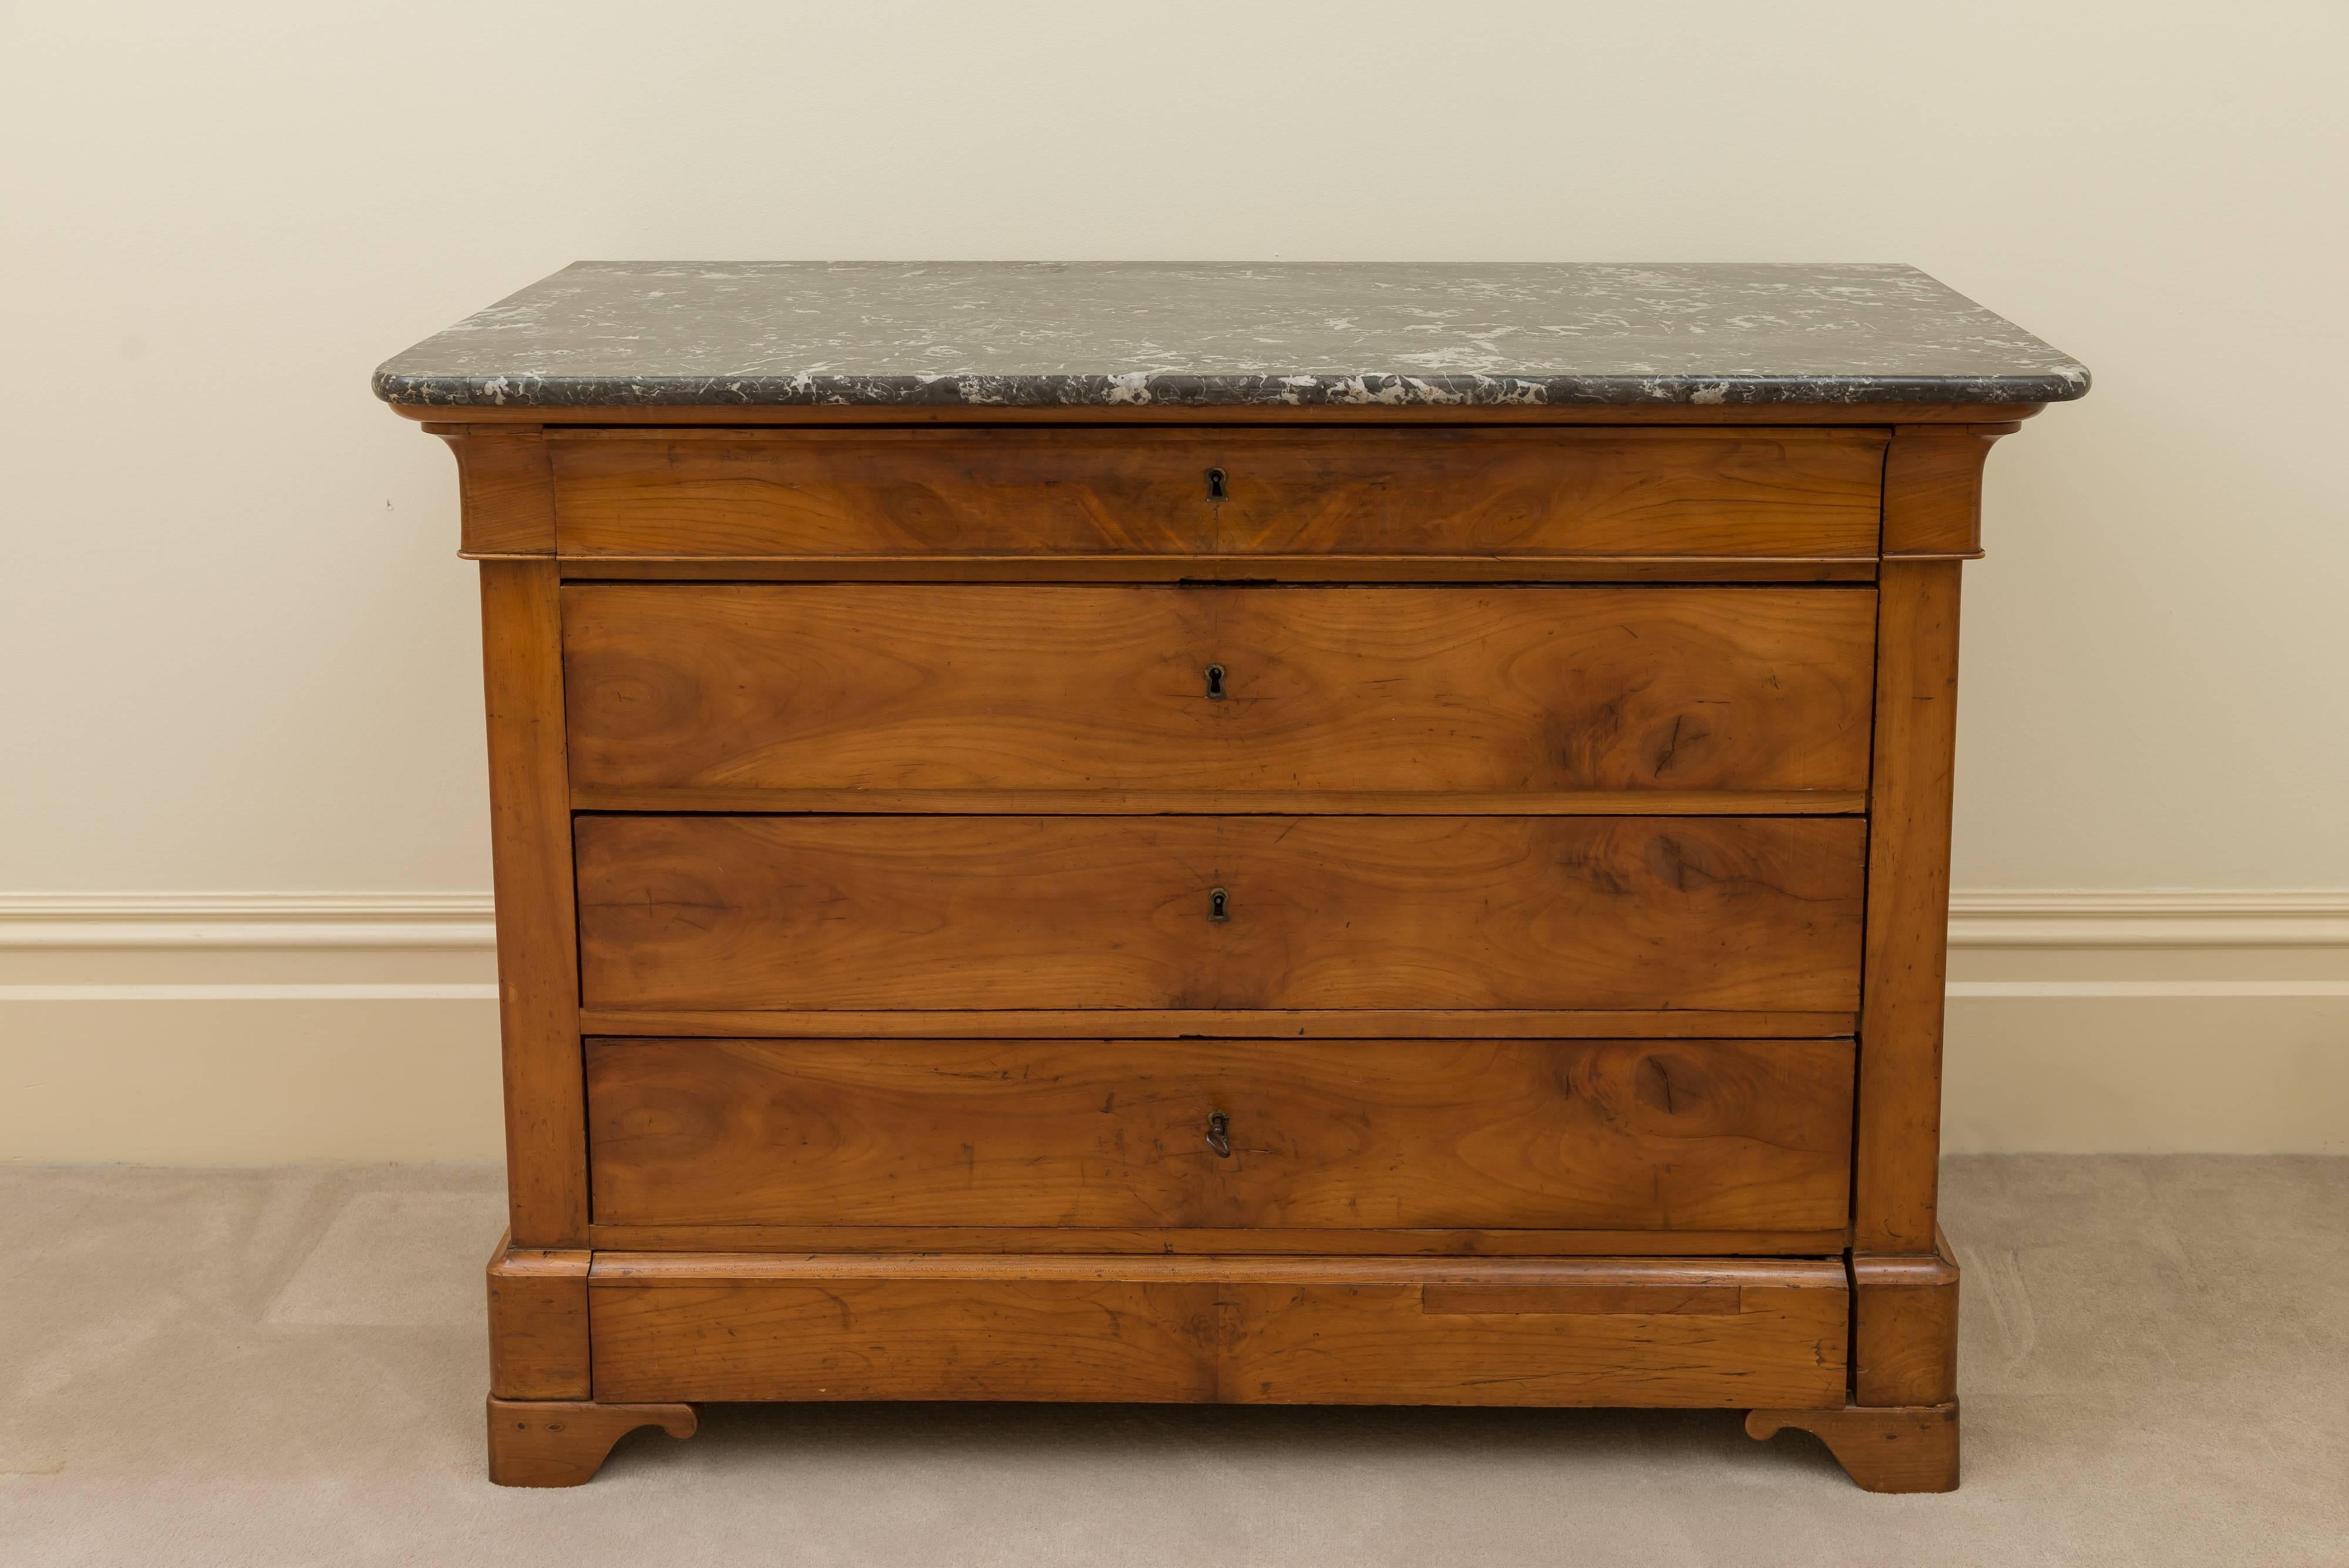 The four-drawer 19th century commode has matched burled walnut veneer. The apron and top drawer have a rolled top edge. The side rails have a bead detail and rest on beveled plinth and foot with curl detail. The sides are solid walnut.